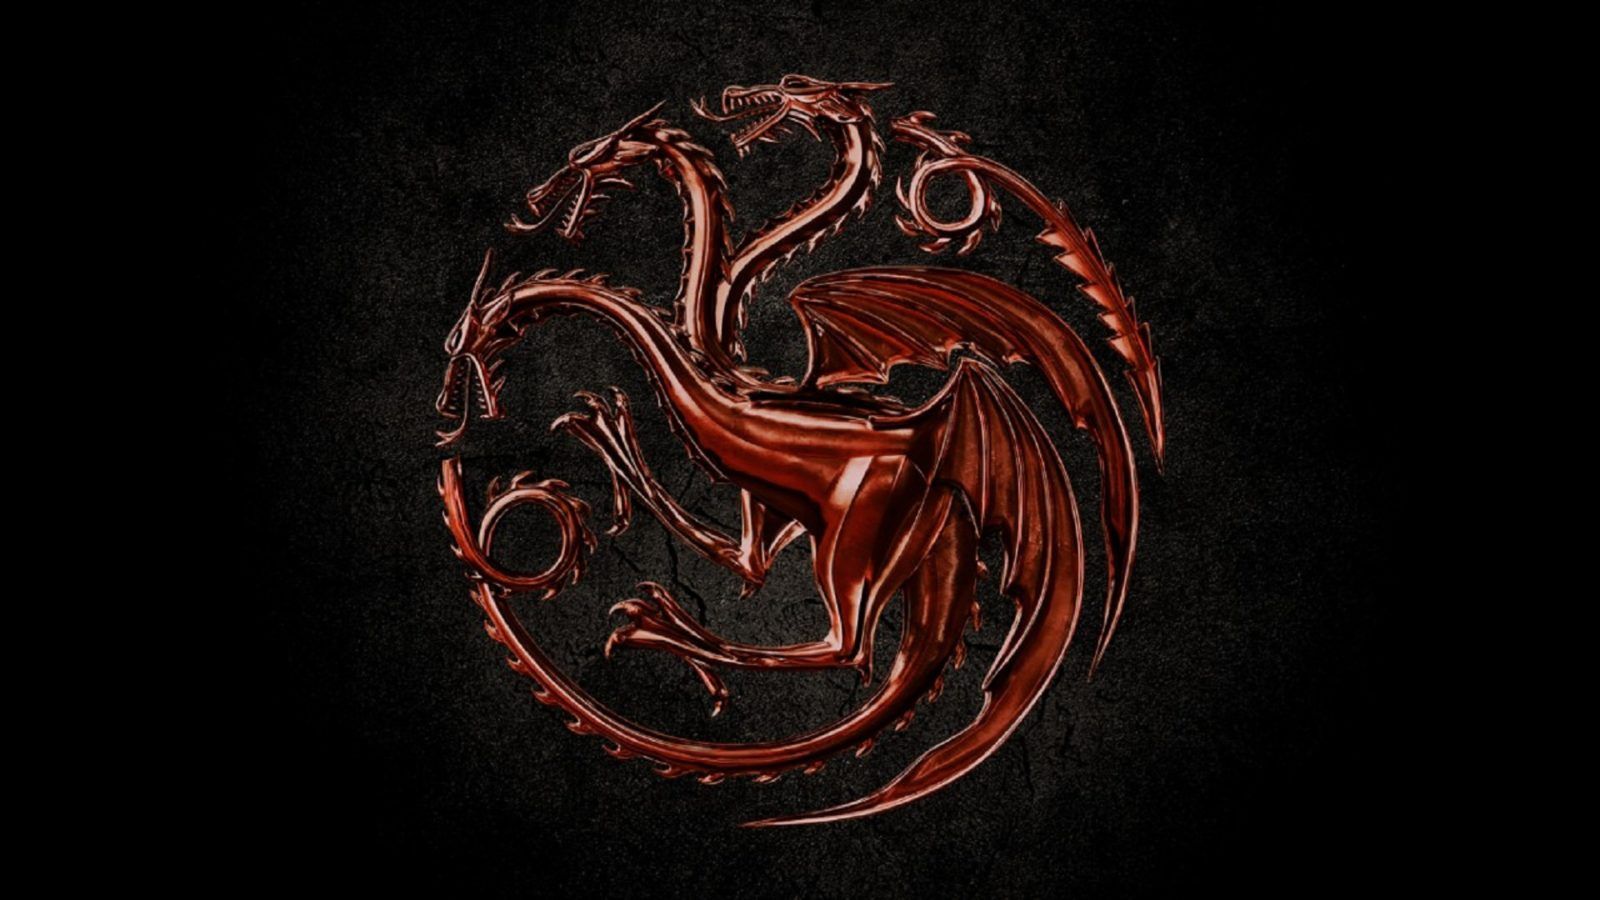 Hbo House Of The Dragon 2020 Wallpapers